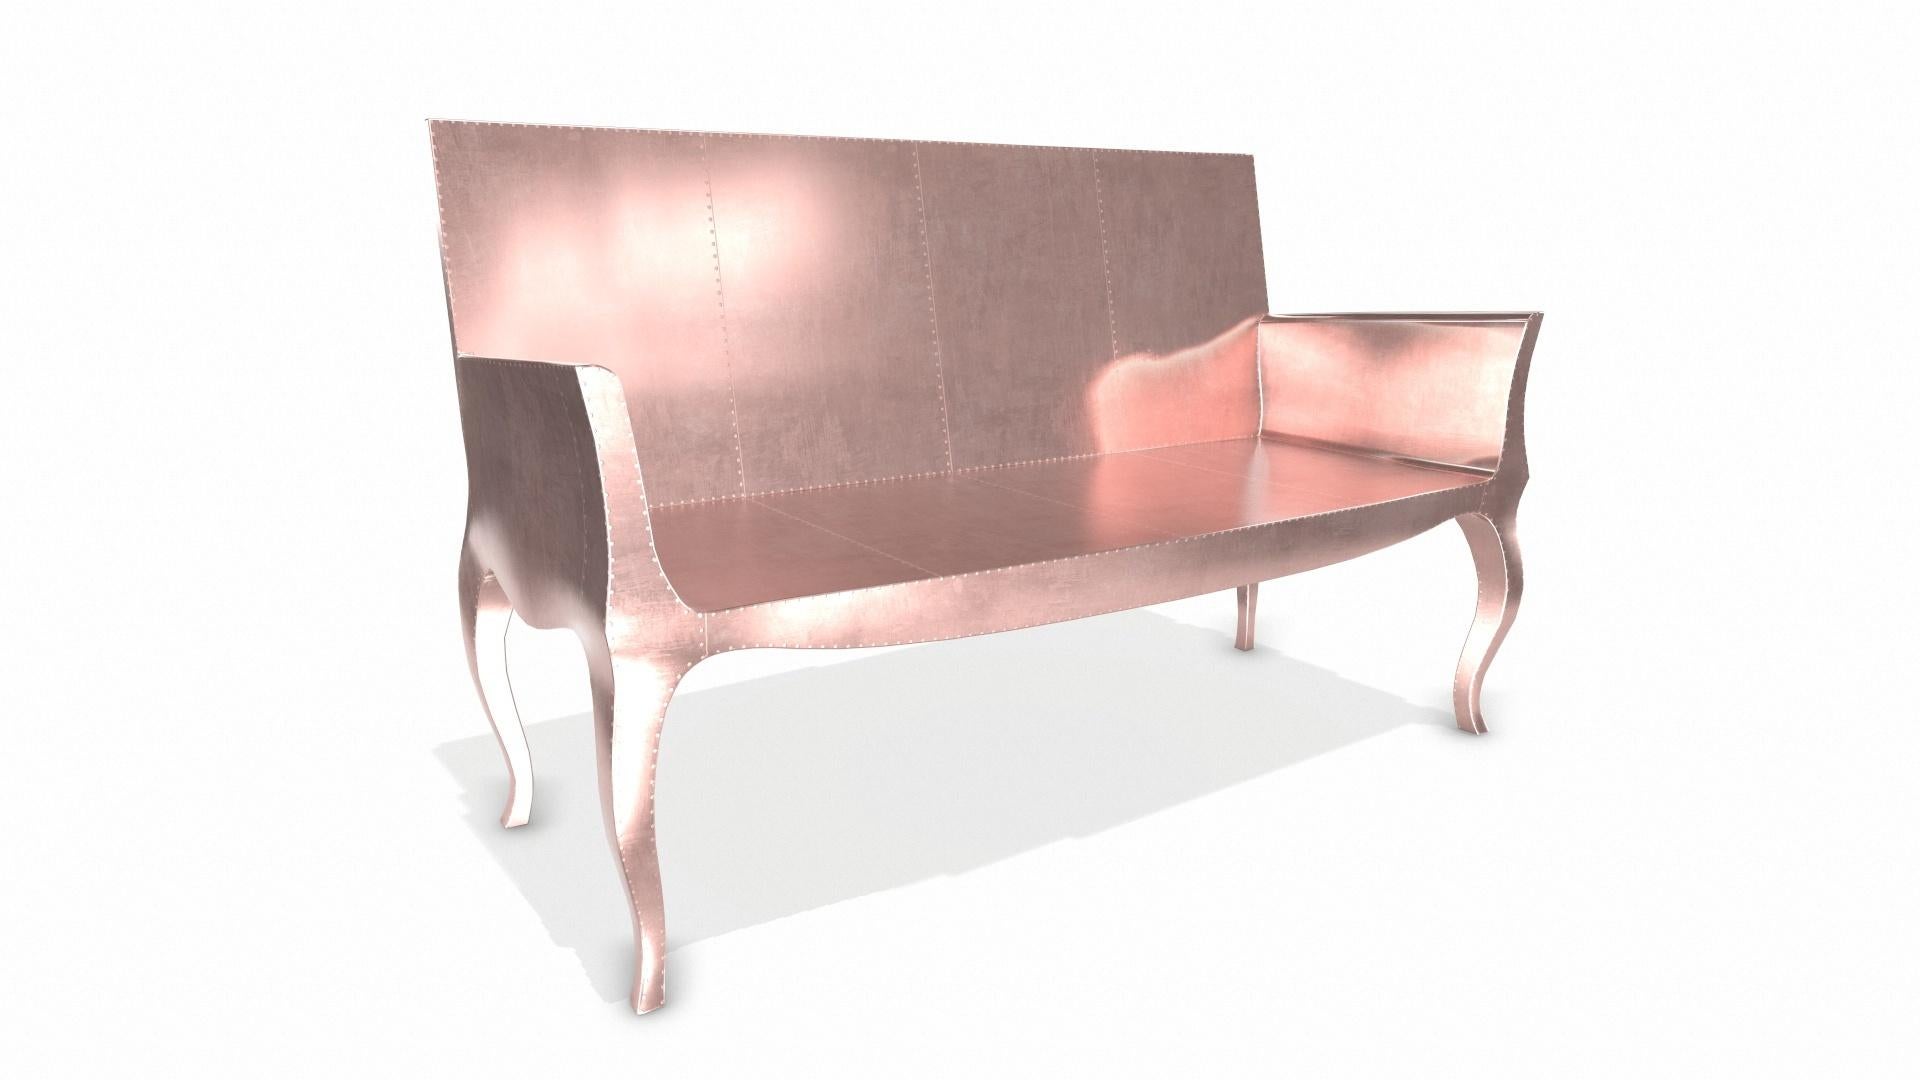 Contemporary Louise Settee Art Deco Canapes in Smooth Copper by Paul Mathieu for S Odegard For Sale